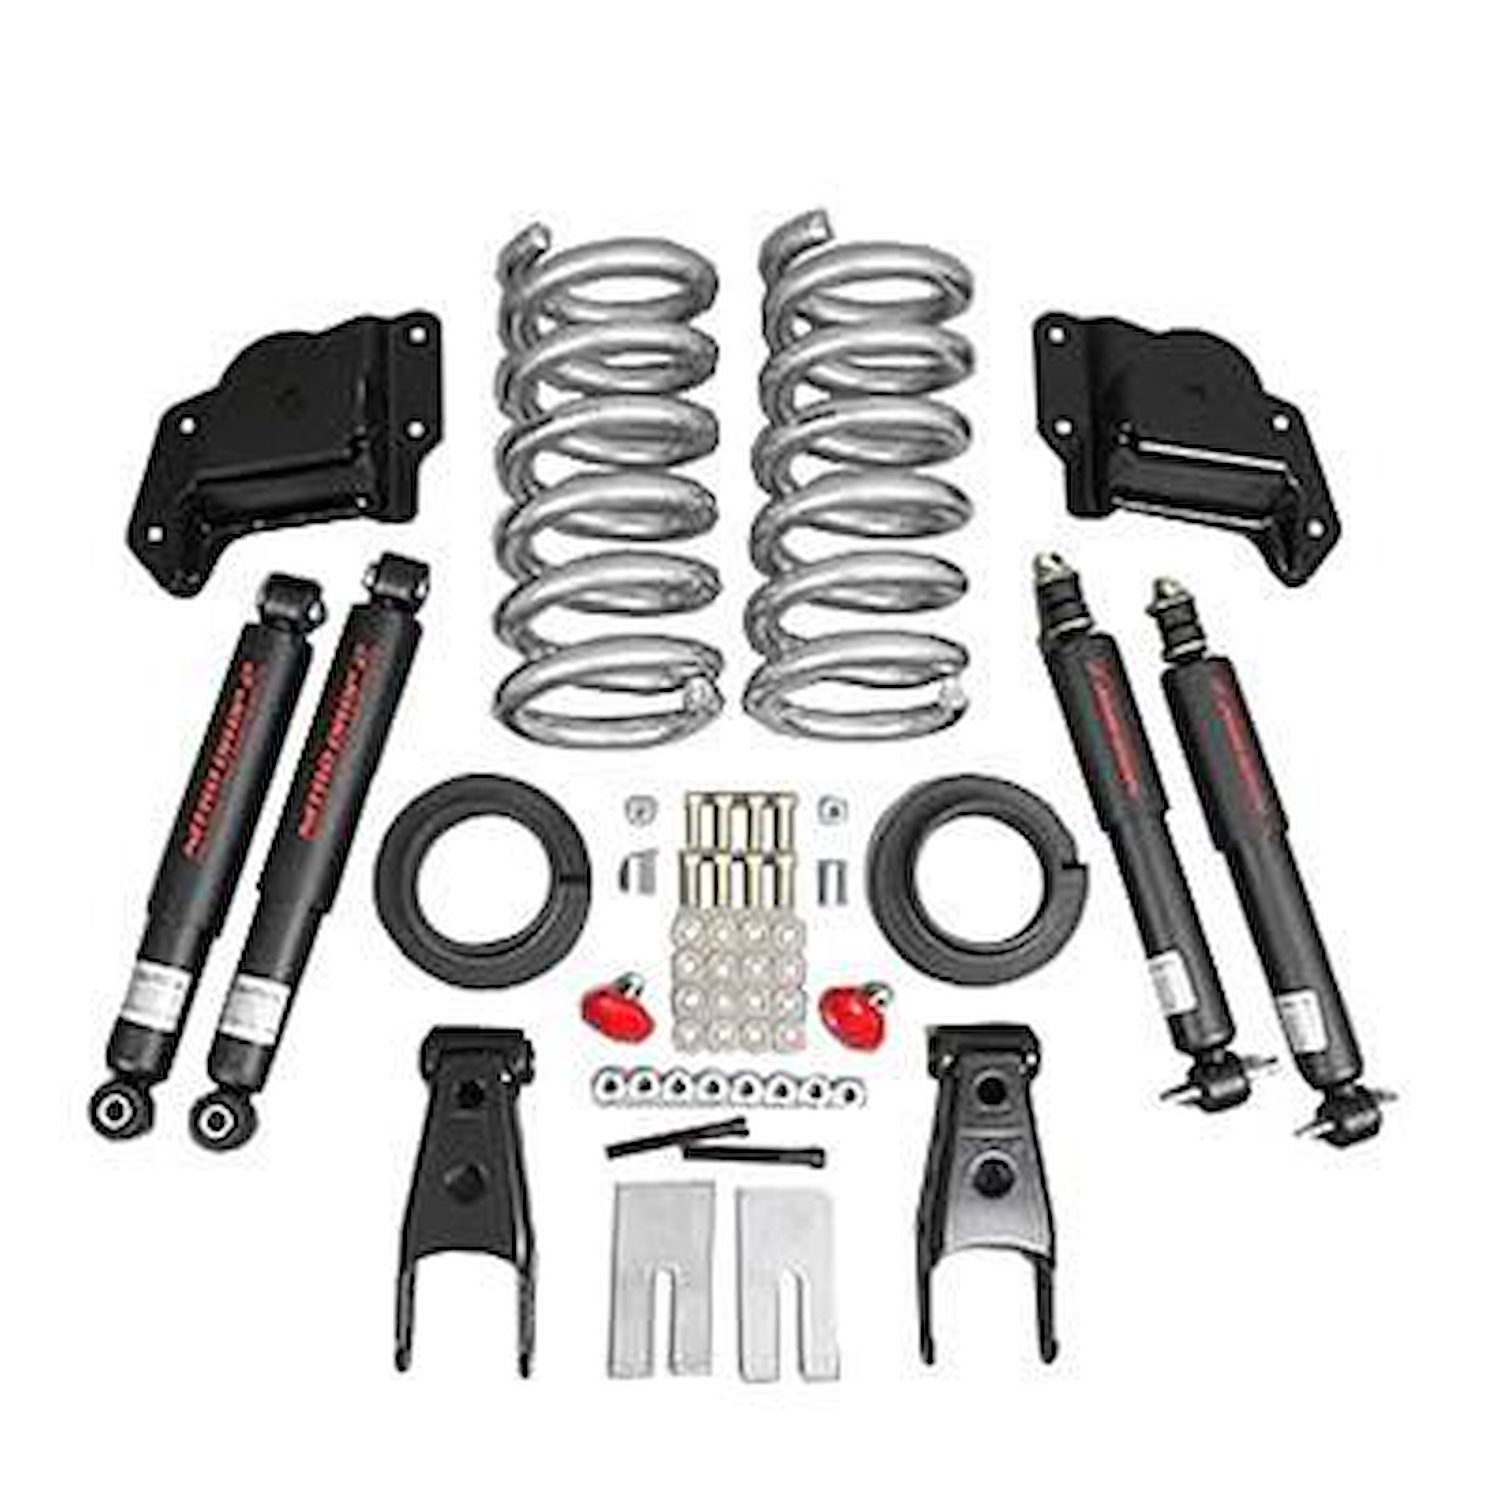 Complete Lowering Kit for 1997-2002 Ford Expedition/Lincoln